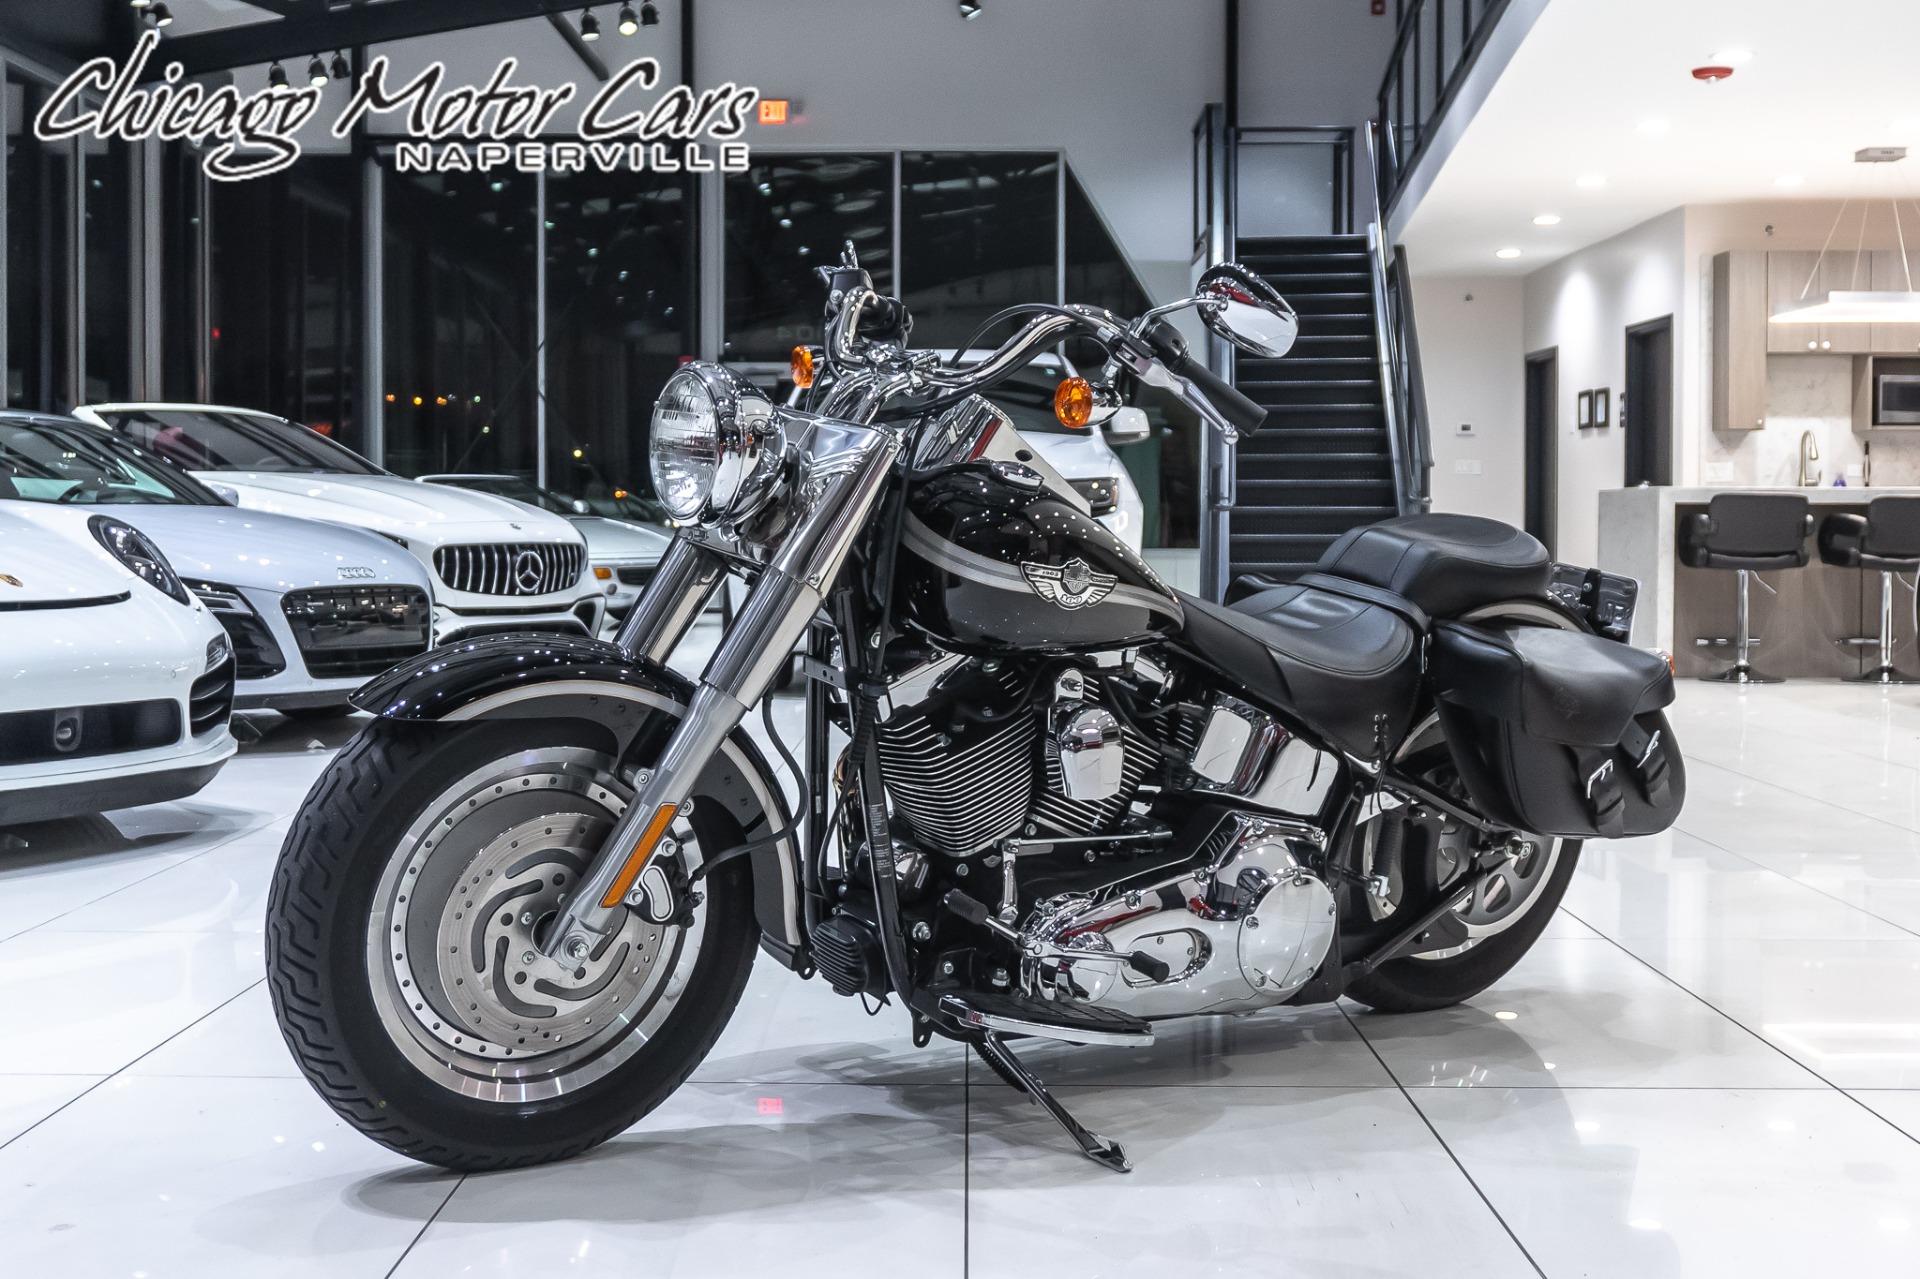 Used-2003-Harley-Davidson-FXST-SOFTAIL-FATBOY-100TH-ANNIVERSARY-EDITION-1450CC-ONLY-3400-MILES